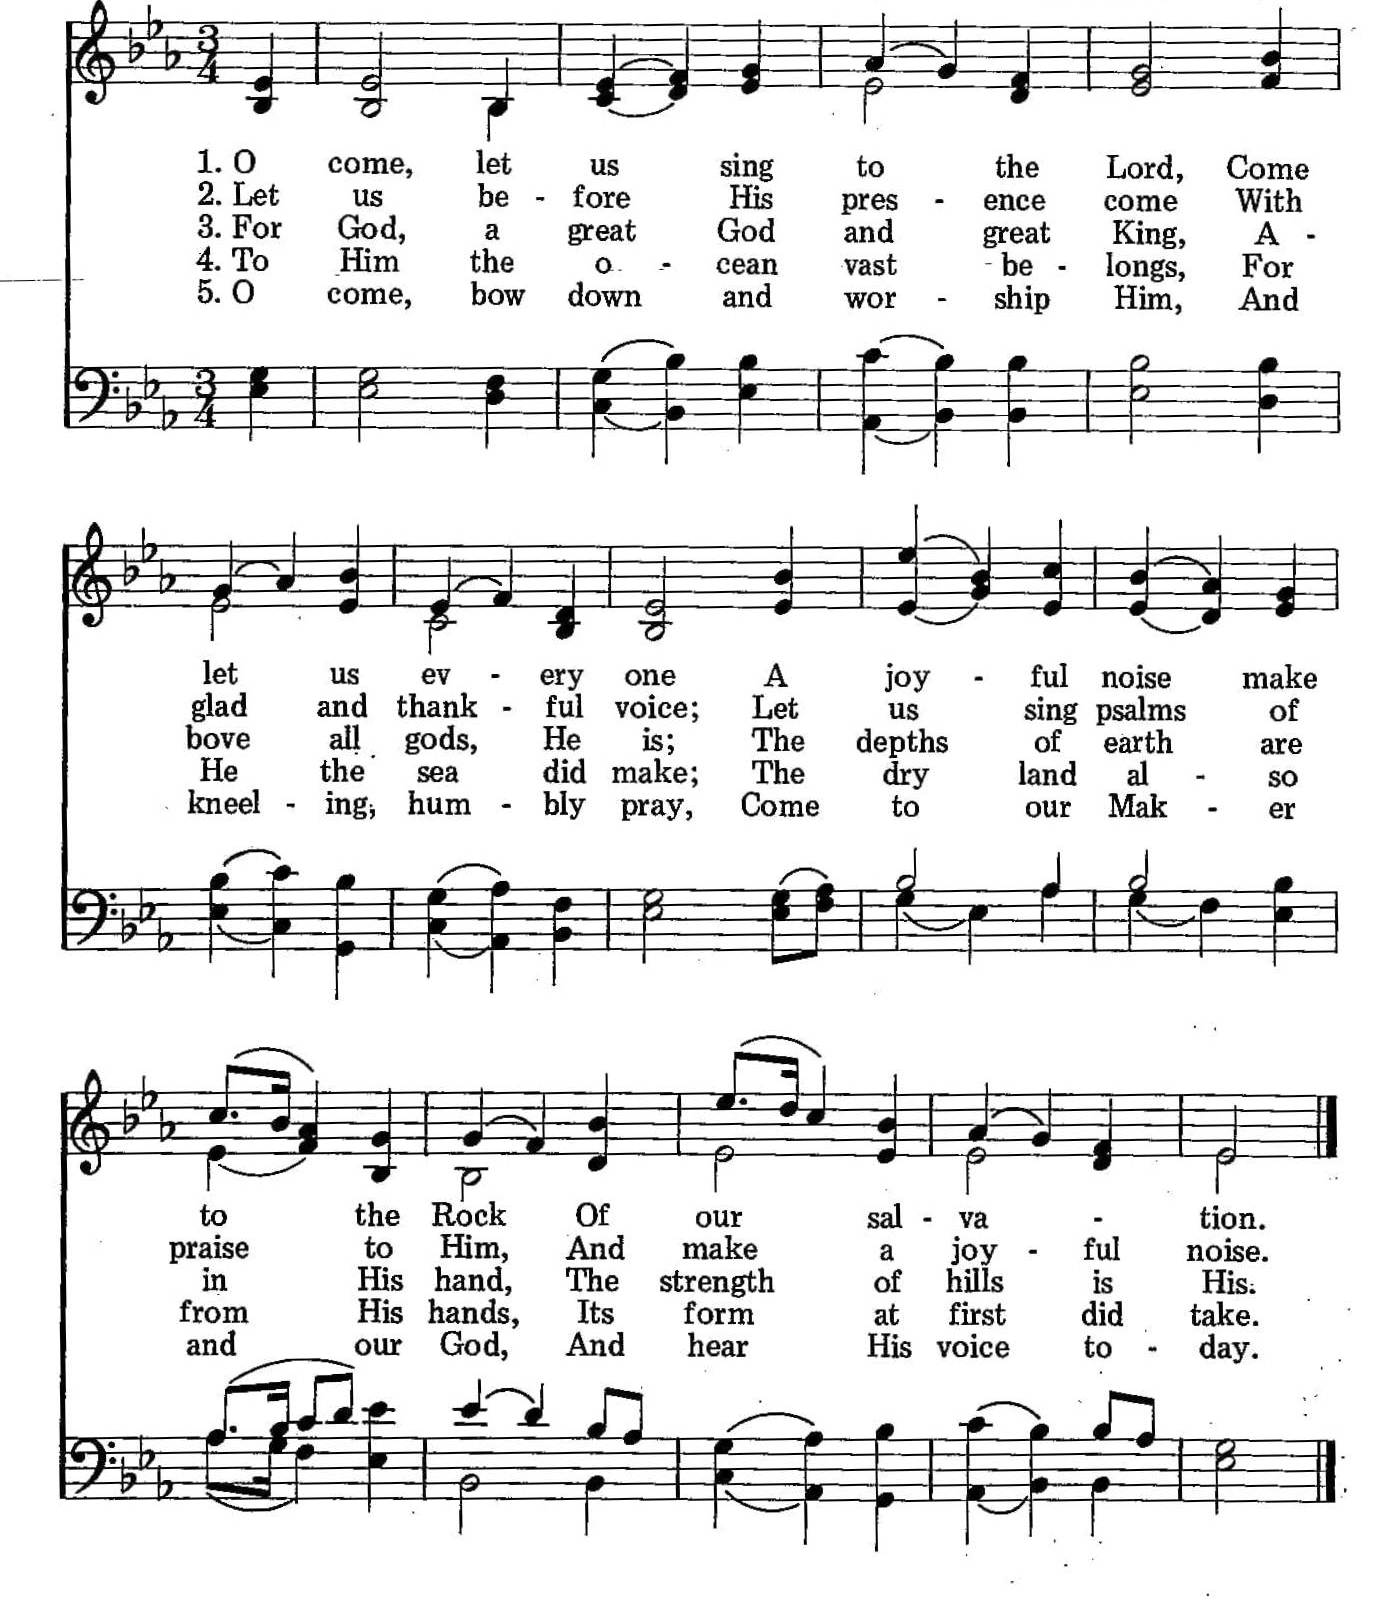 063 – O Come, Let Us Sing to the Lord sheet music